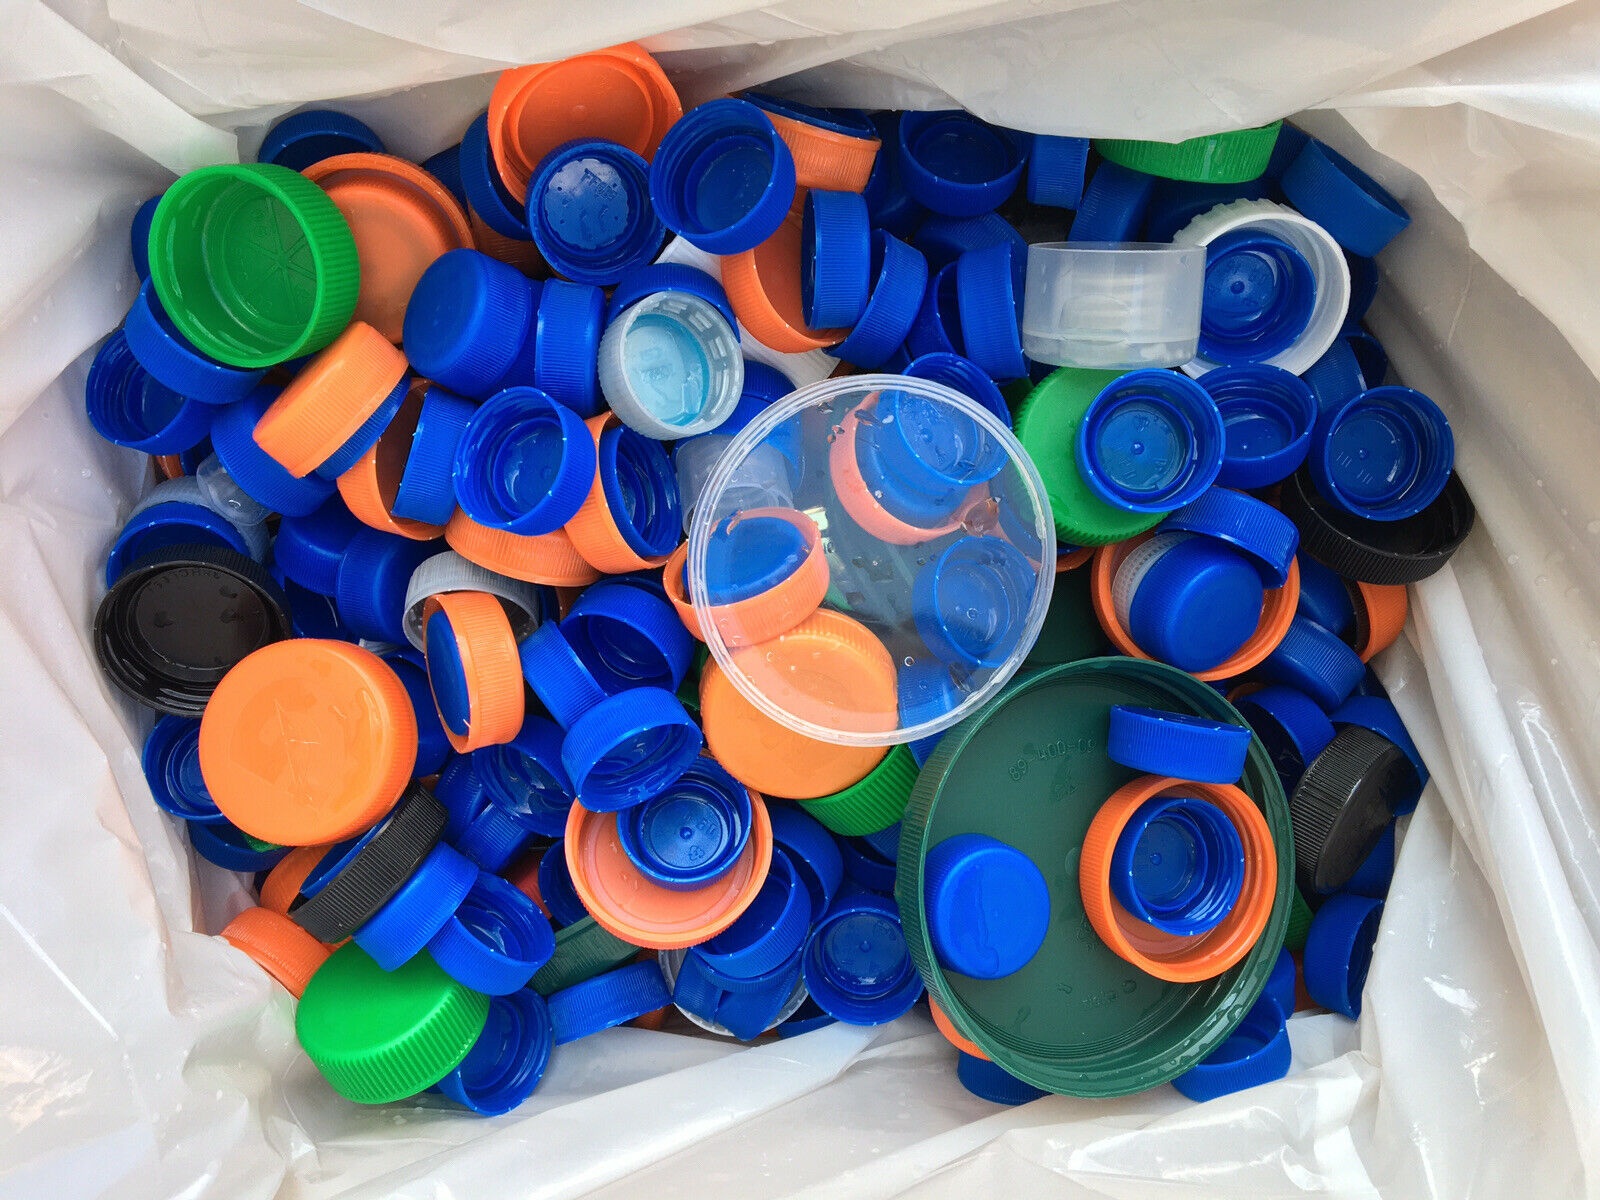 600 Clean Plastic Bottle Caps - Assorted Colors & Sizes - For Crafts